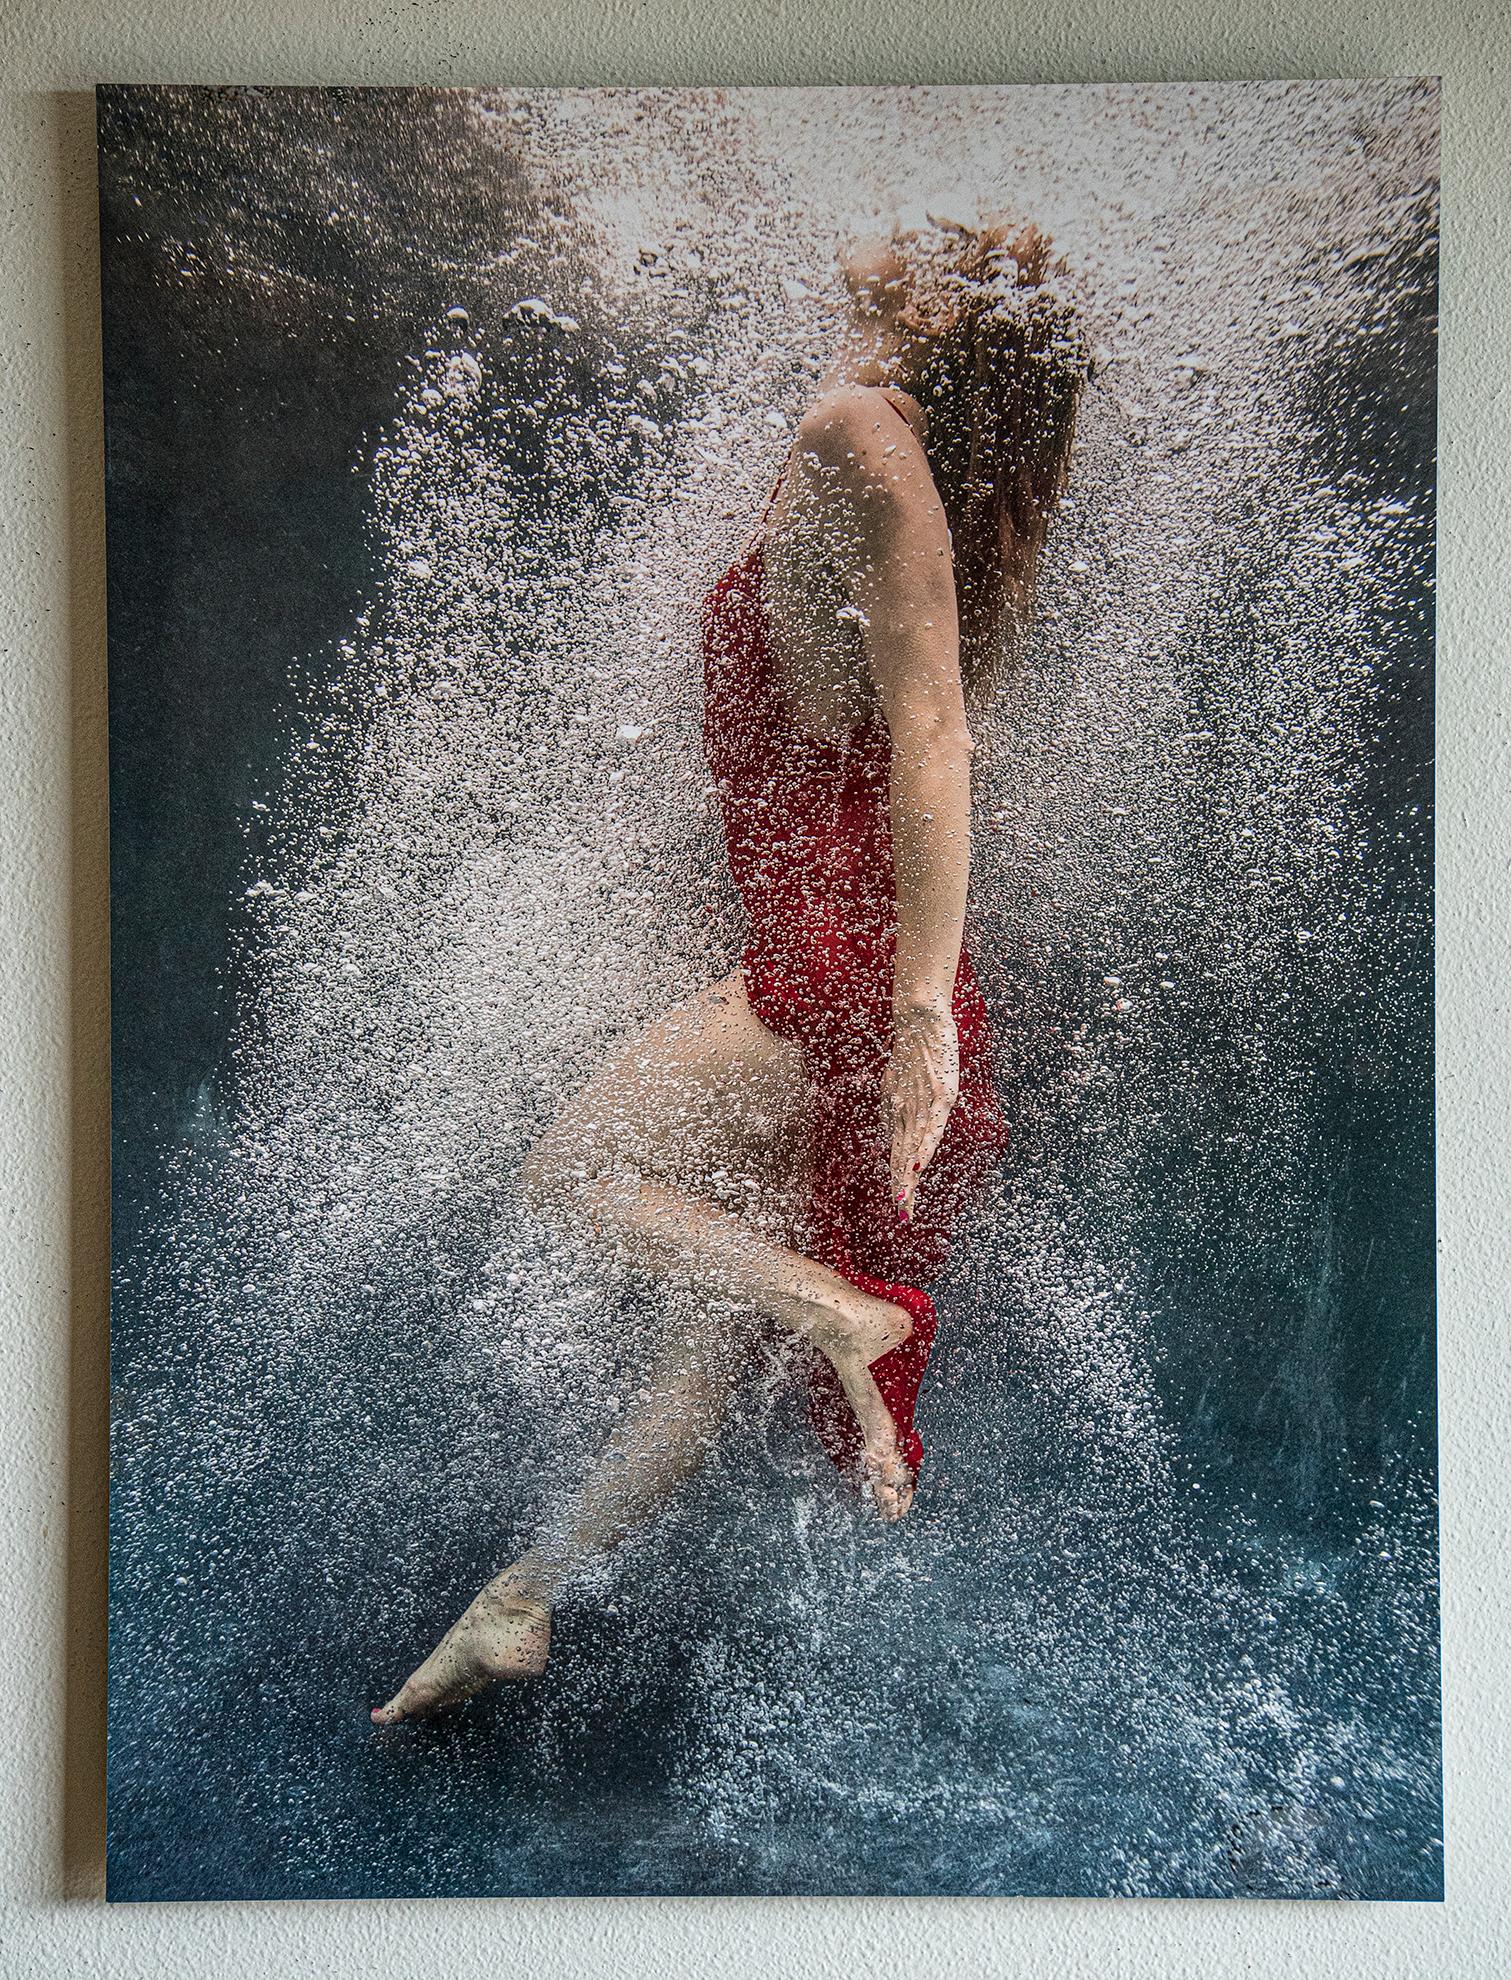 Coming Back   - underwater photograph - print on aluminum - Photograph by Alex Sher